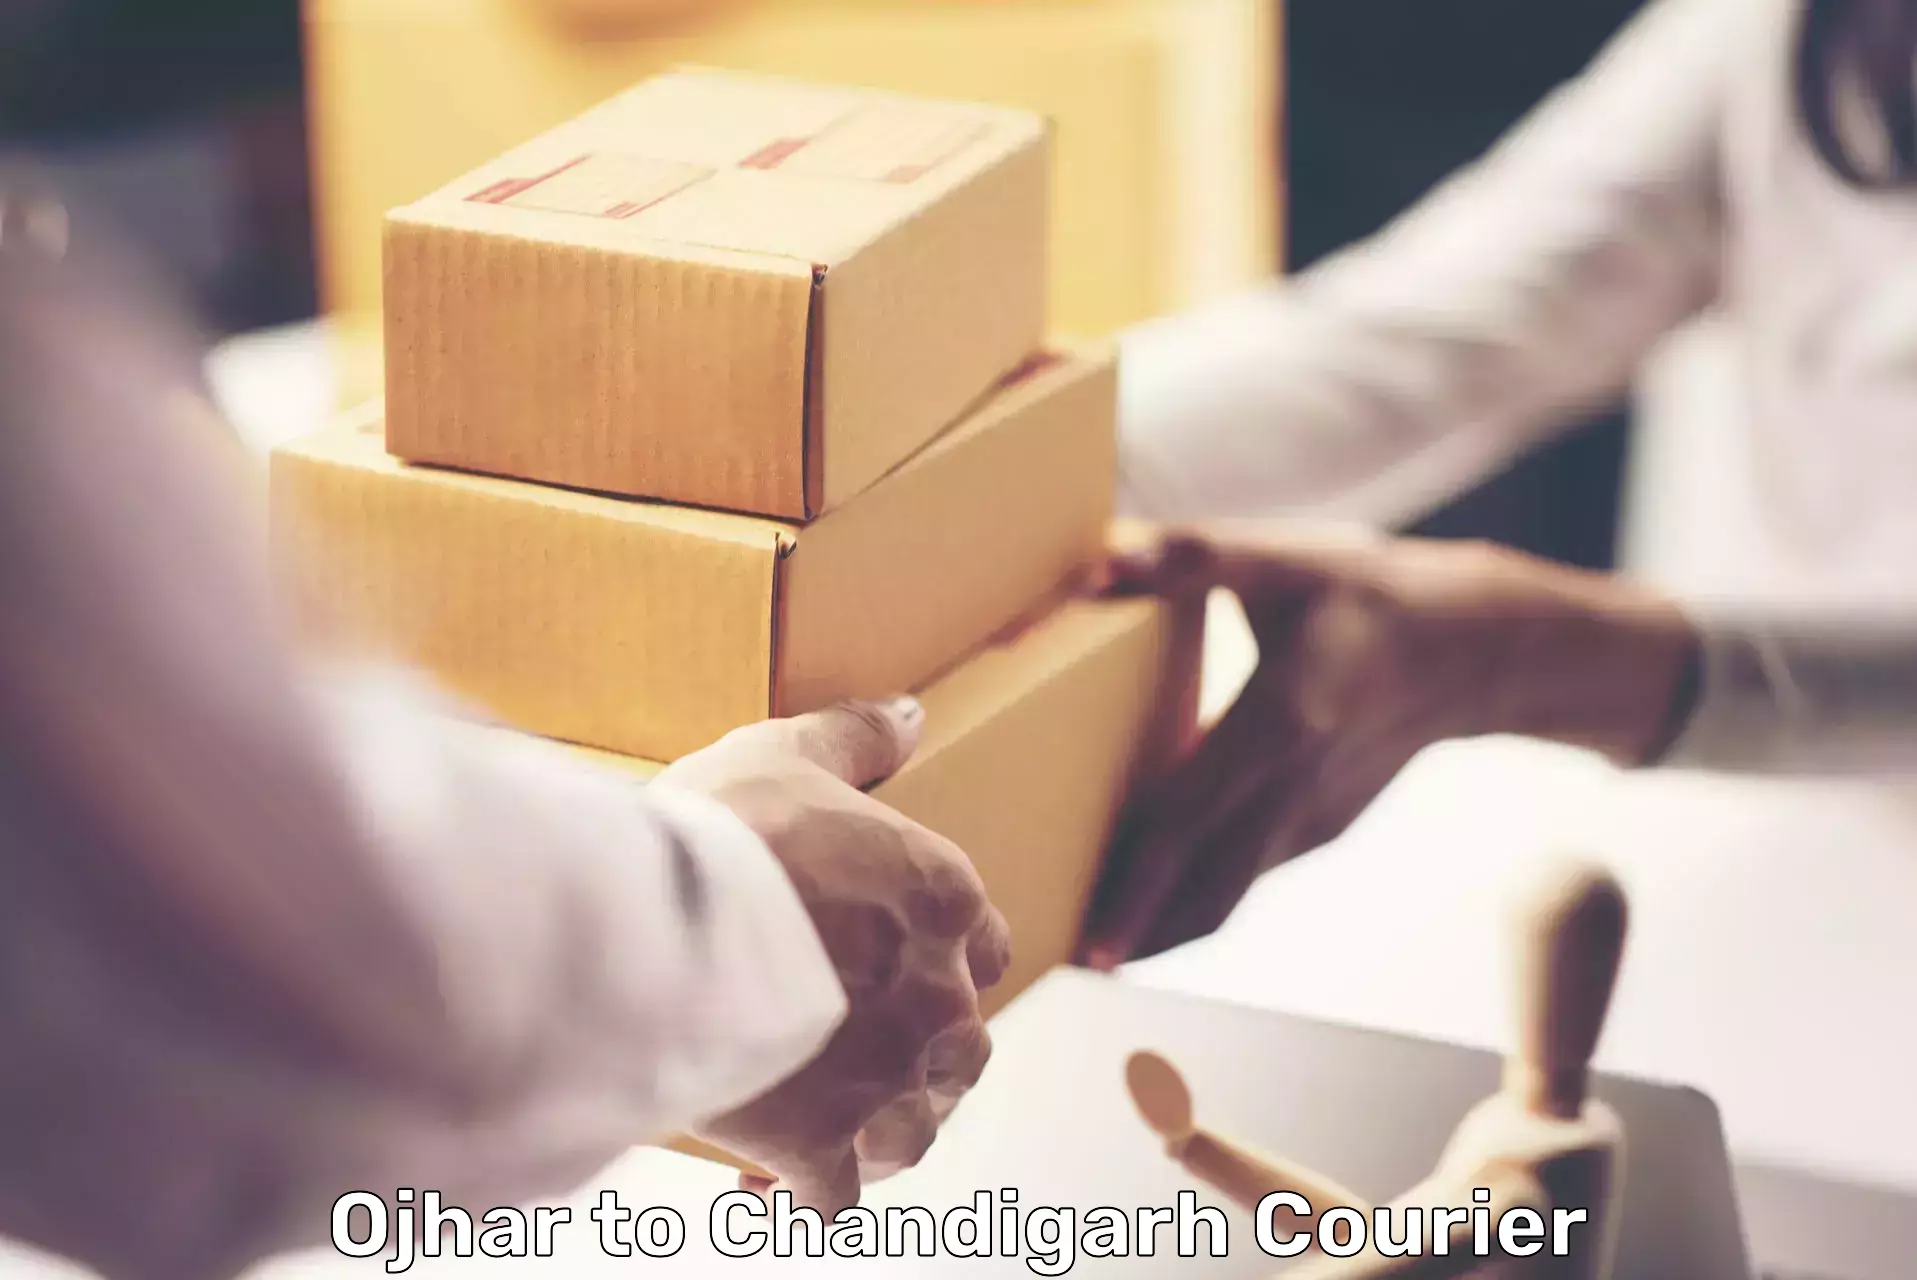 Delivery service partnership Ojhar to Chandigarh